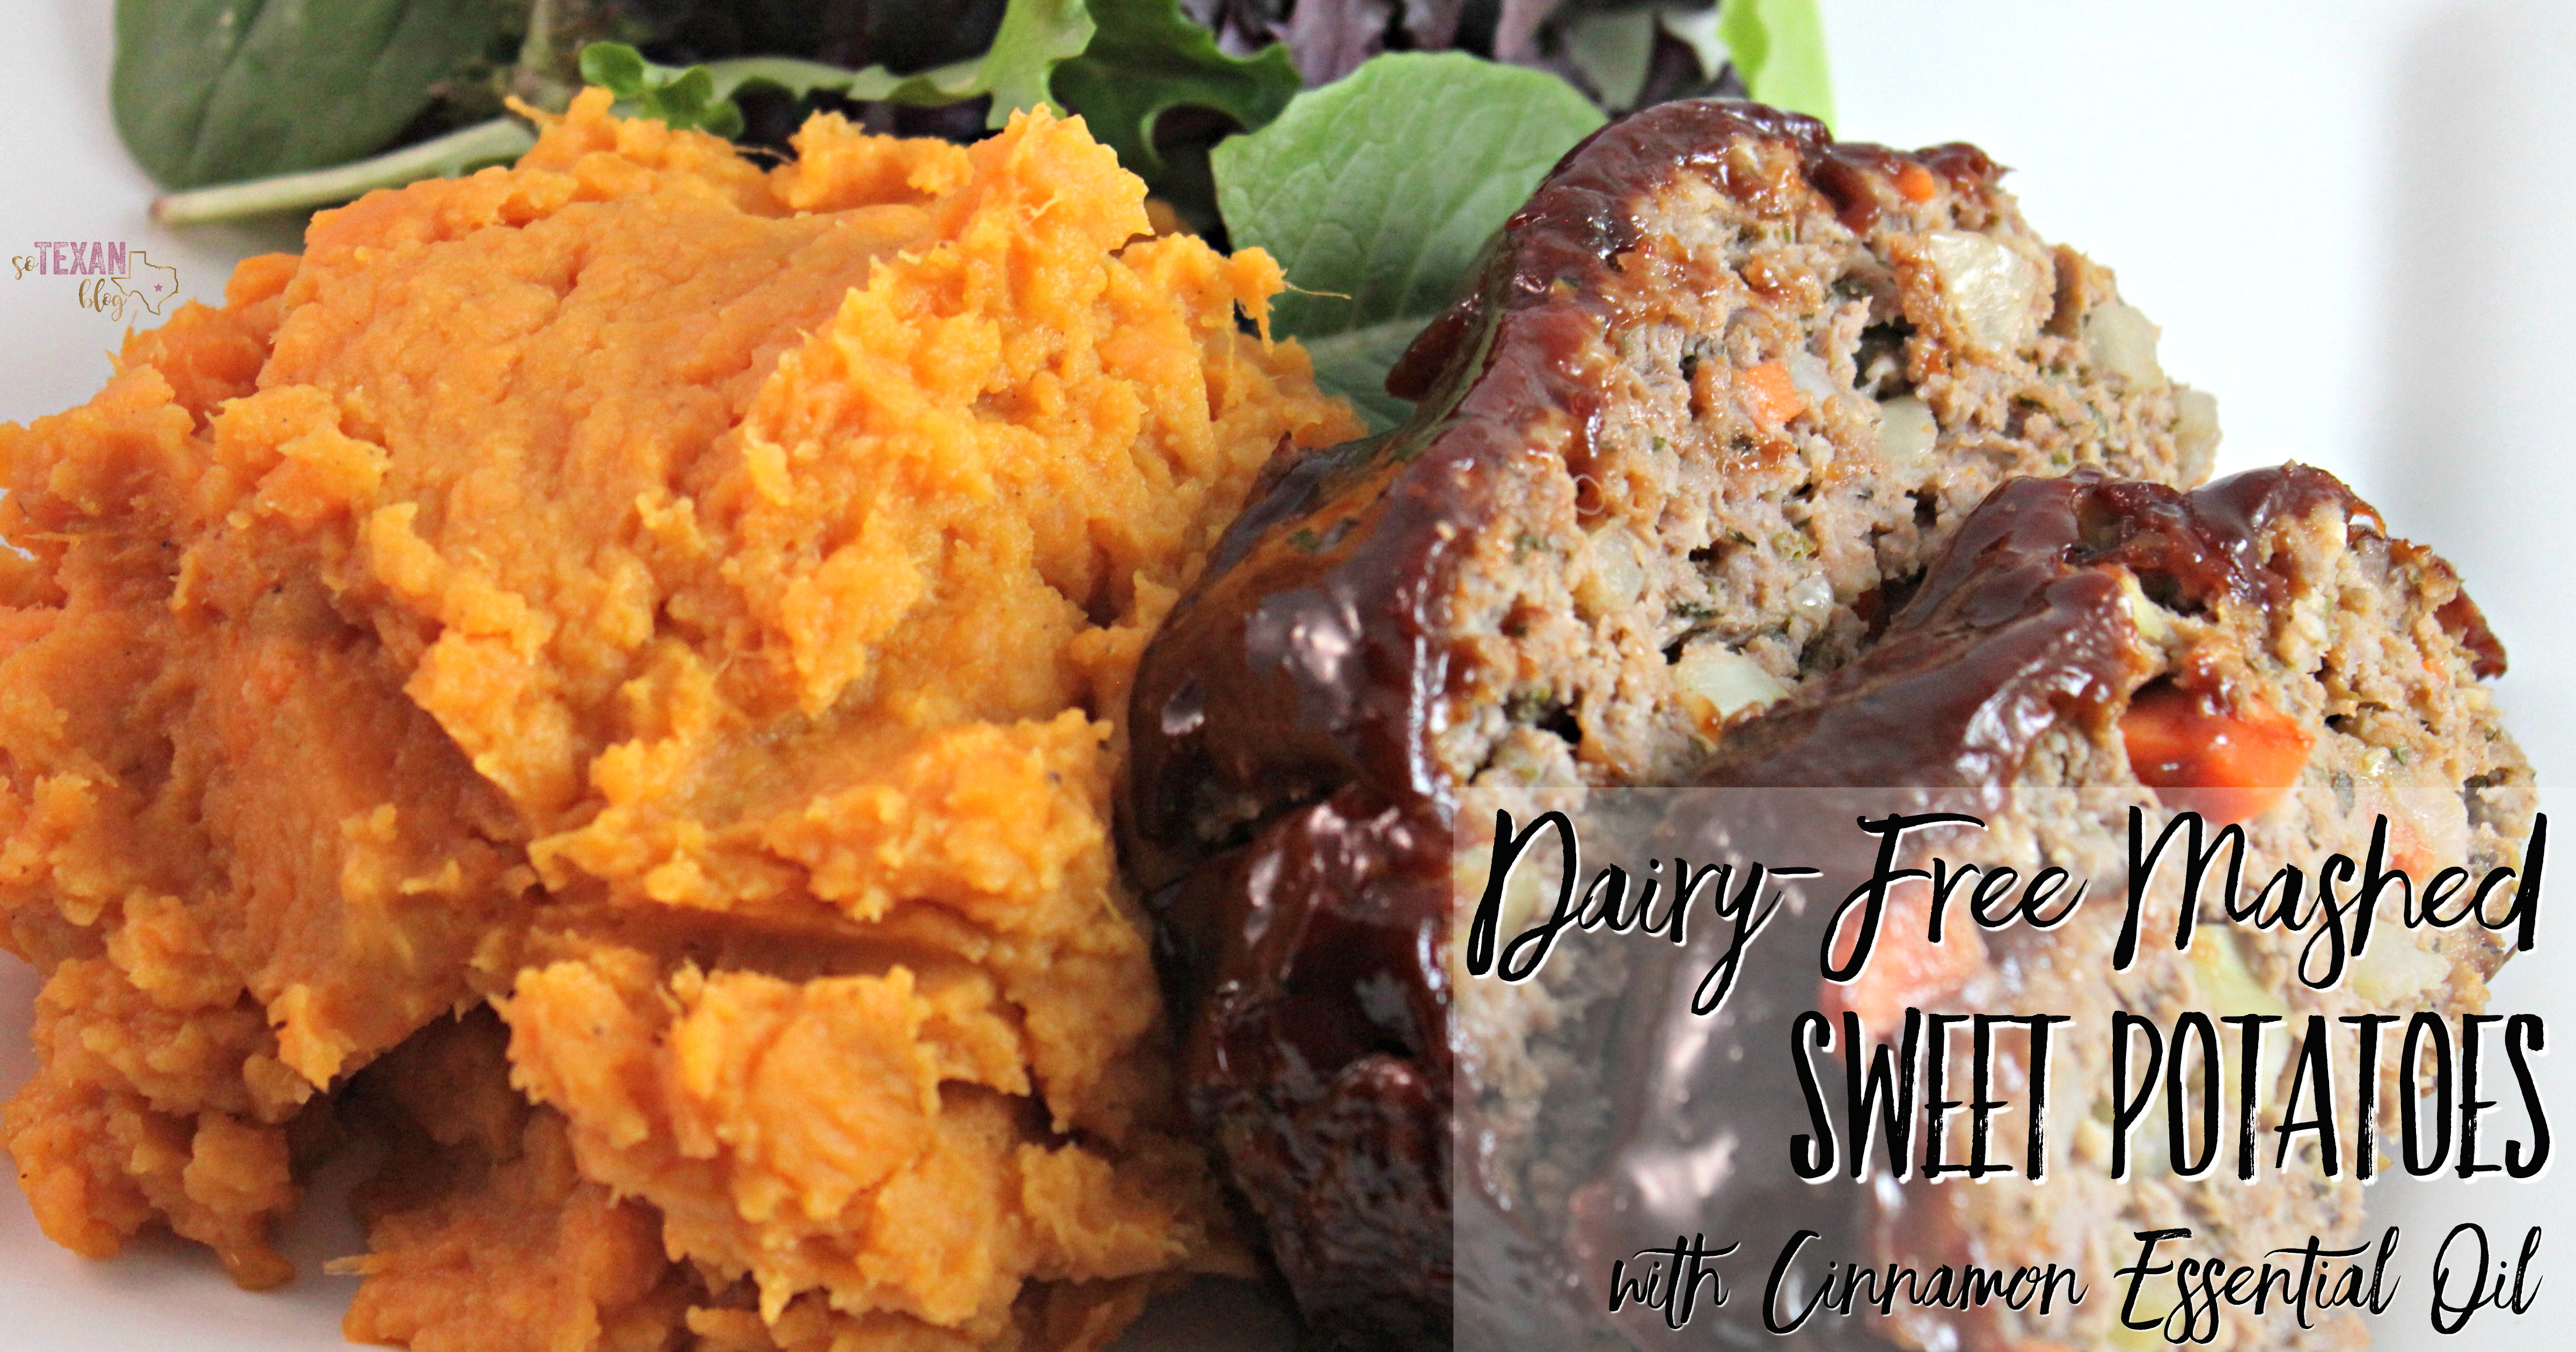 Dairy Free Mashed Sweet Potatoes
 Mashed Sweet Potatoes with Cinnamon Essential Oil Dairy Free